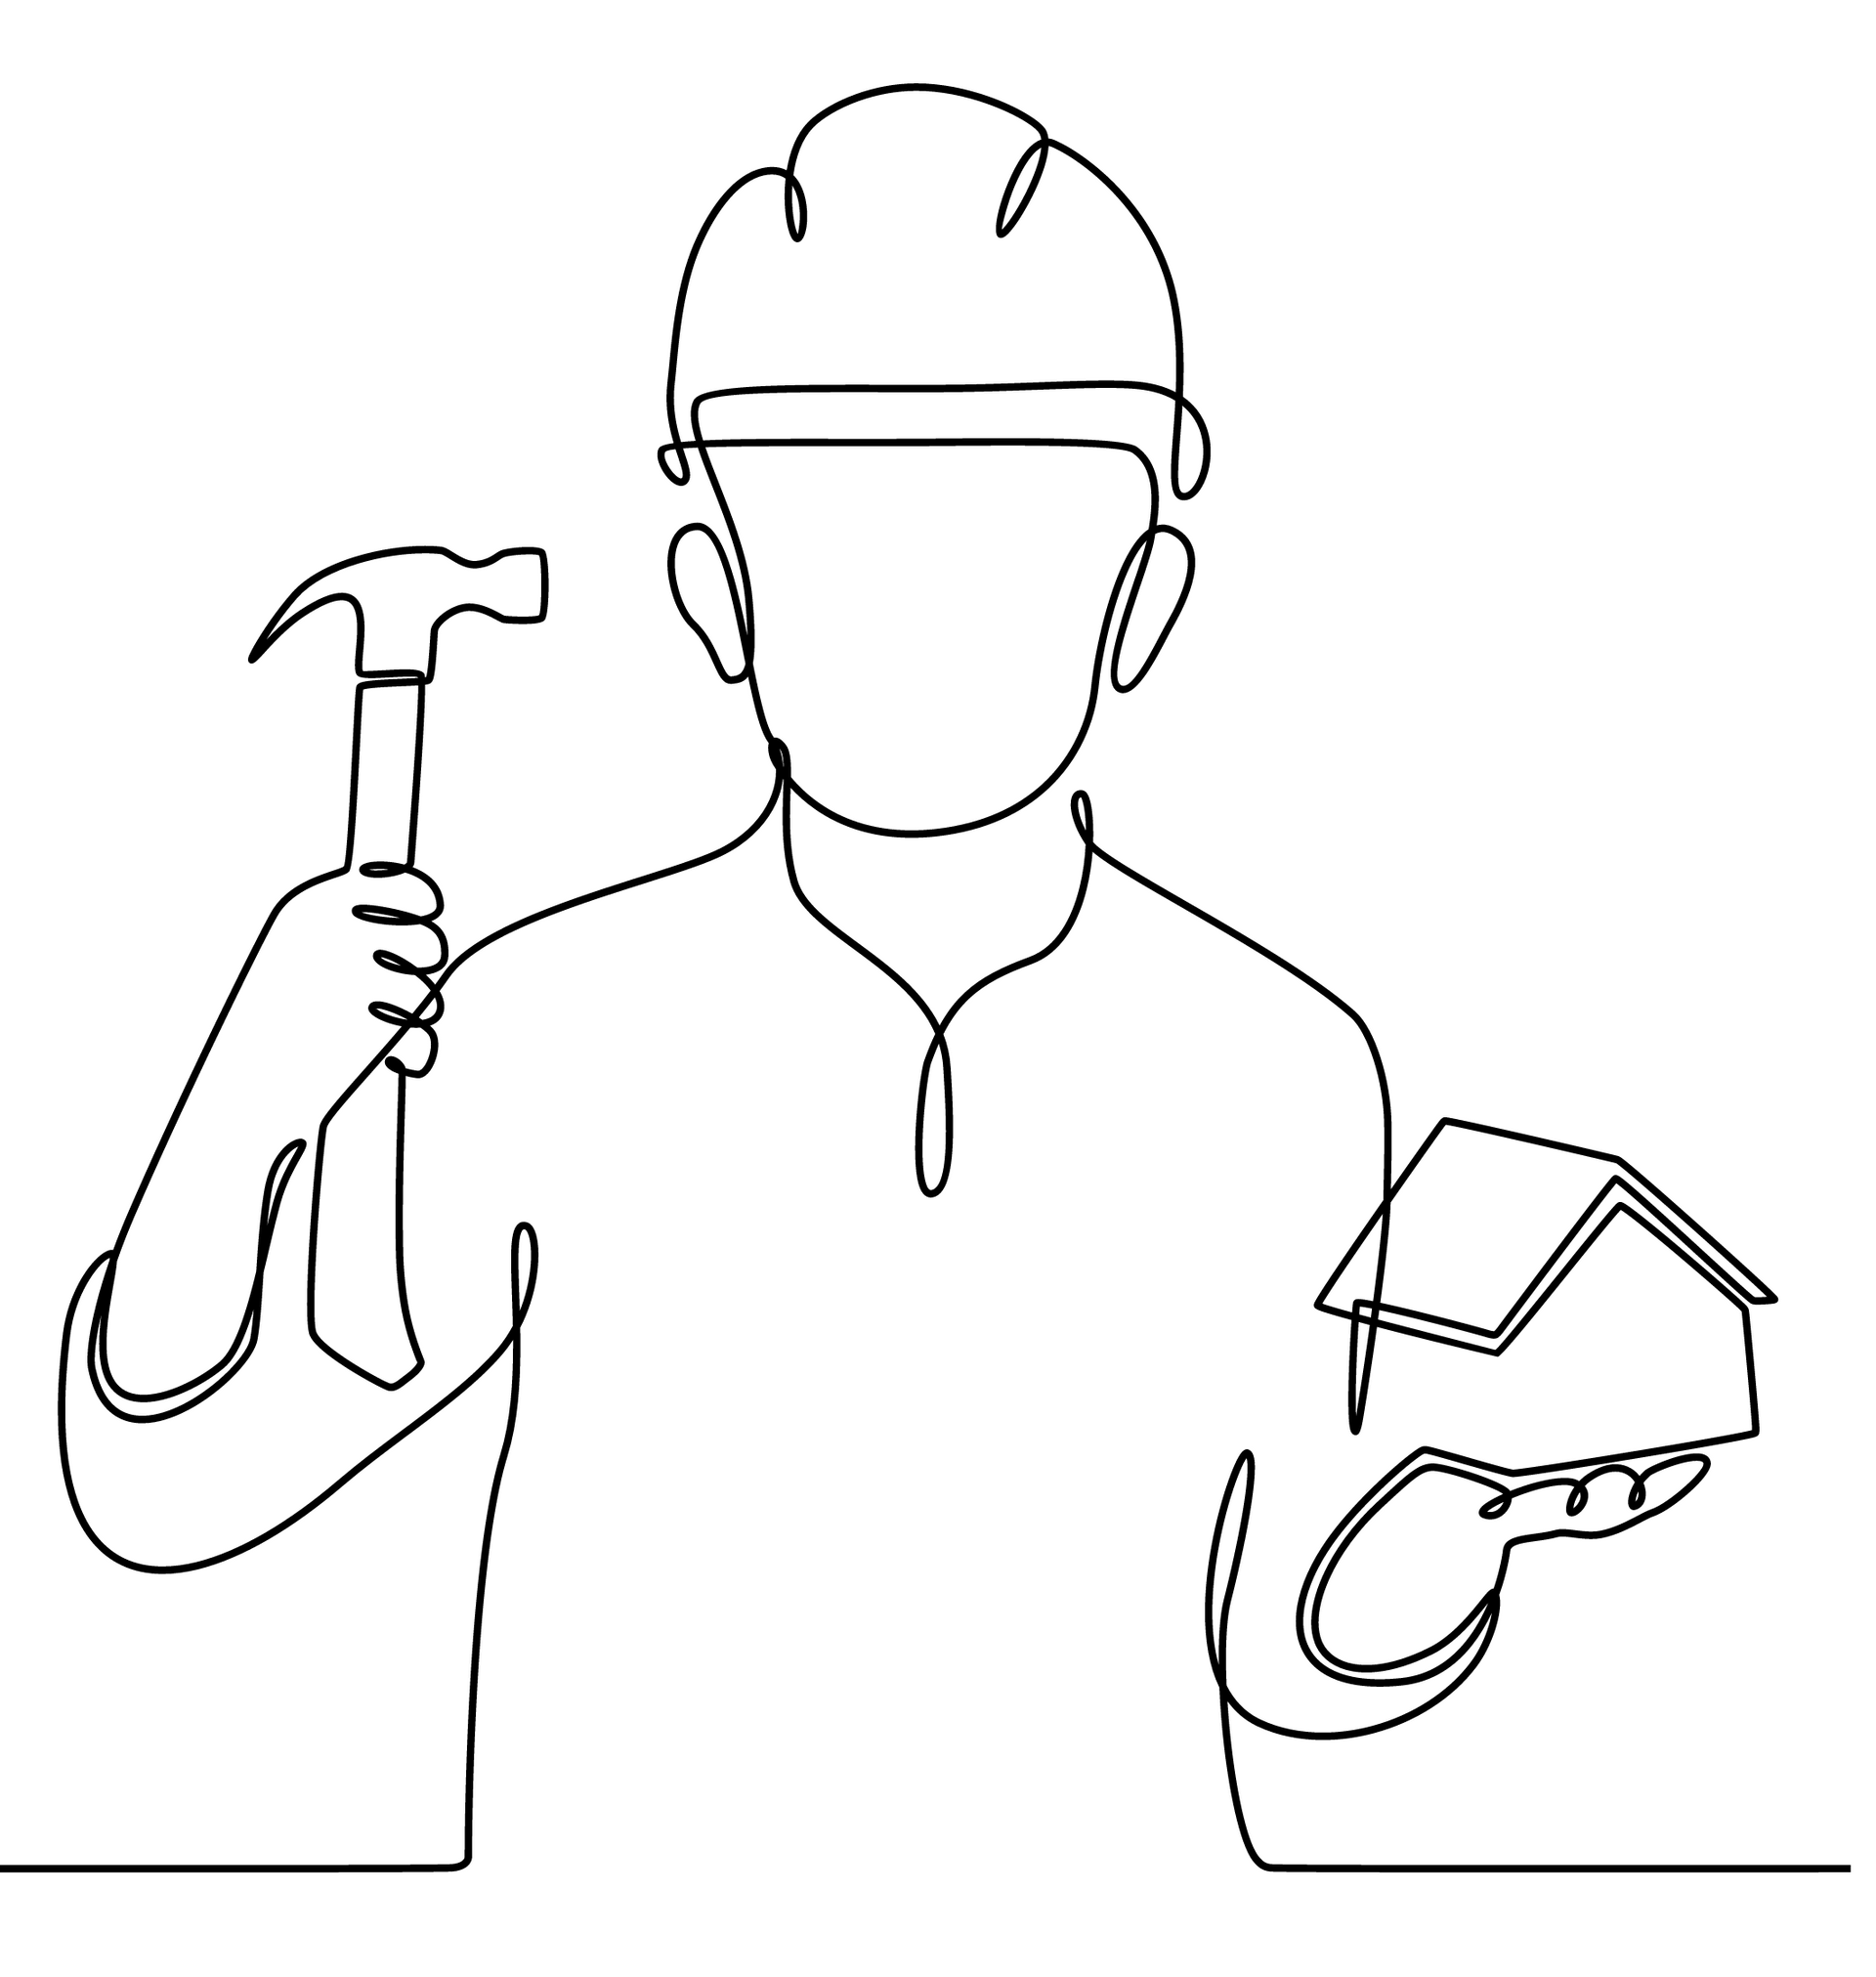 A continuous line drawing of a man holding a hammer and a house.